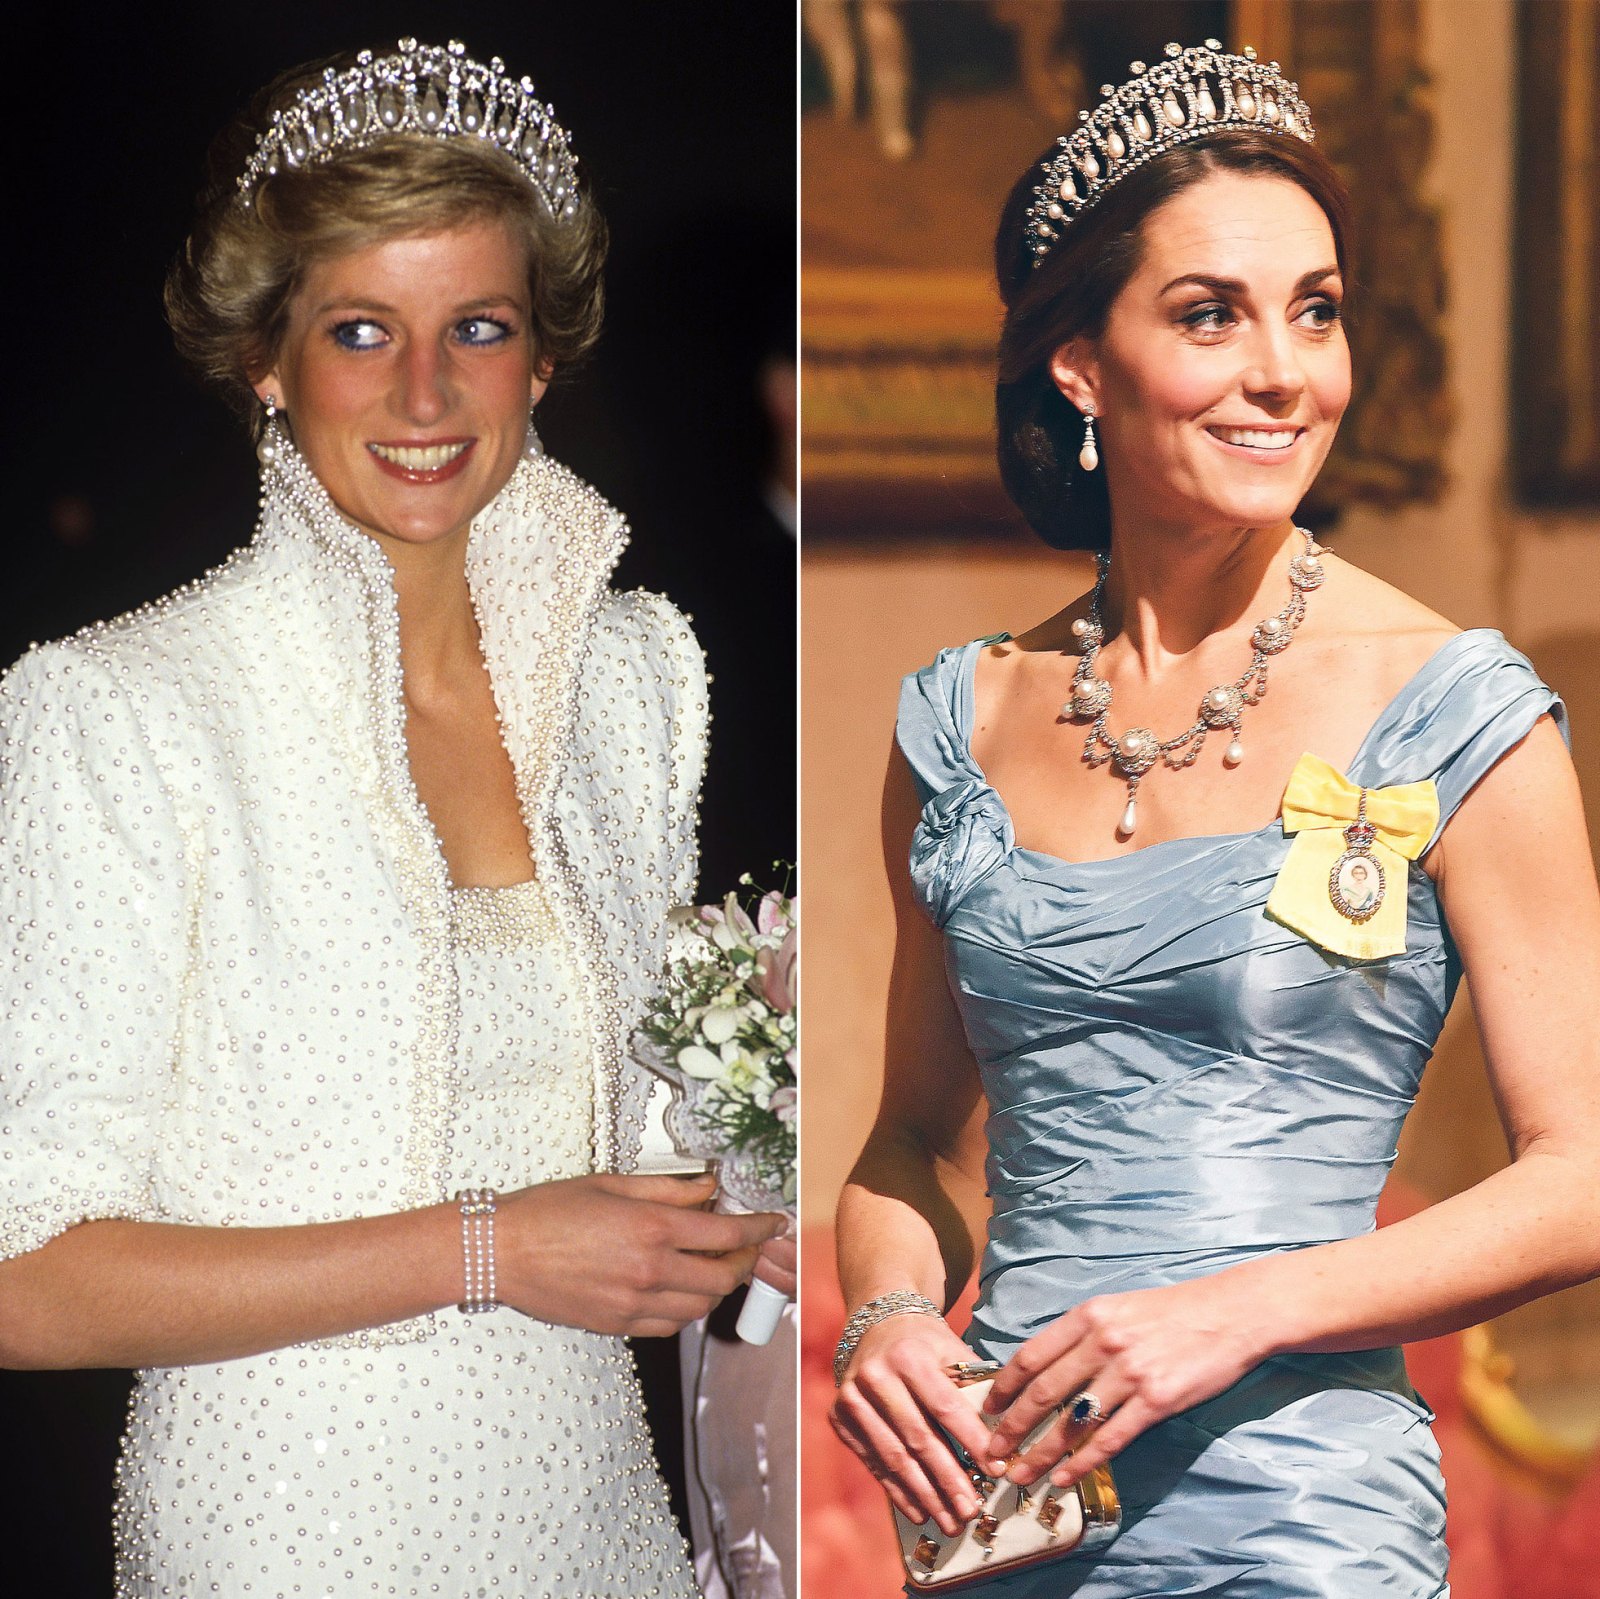 Princess Diana's Jewelry Worn by Duchesses Kate and Meghan